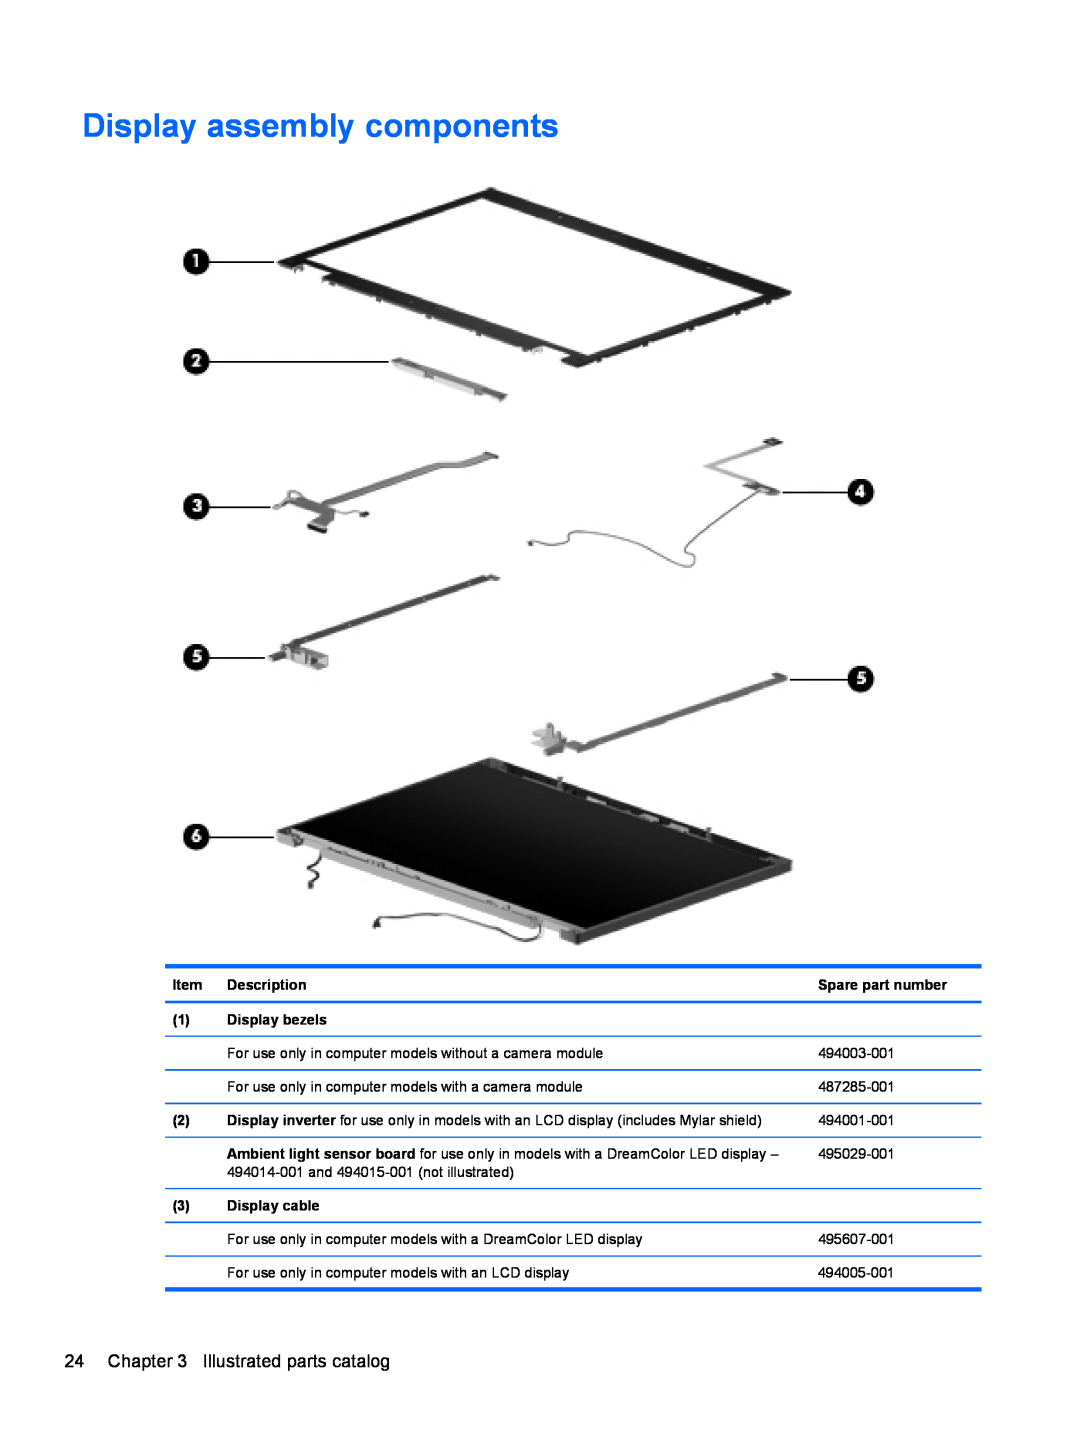 HP FN038UAABA, FN037UAABA manual Display assembly components, Illustrated parts catalog 